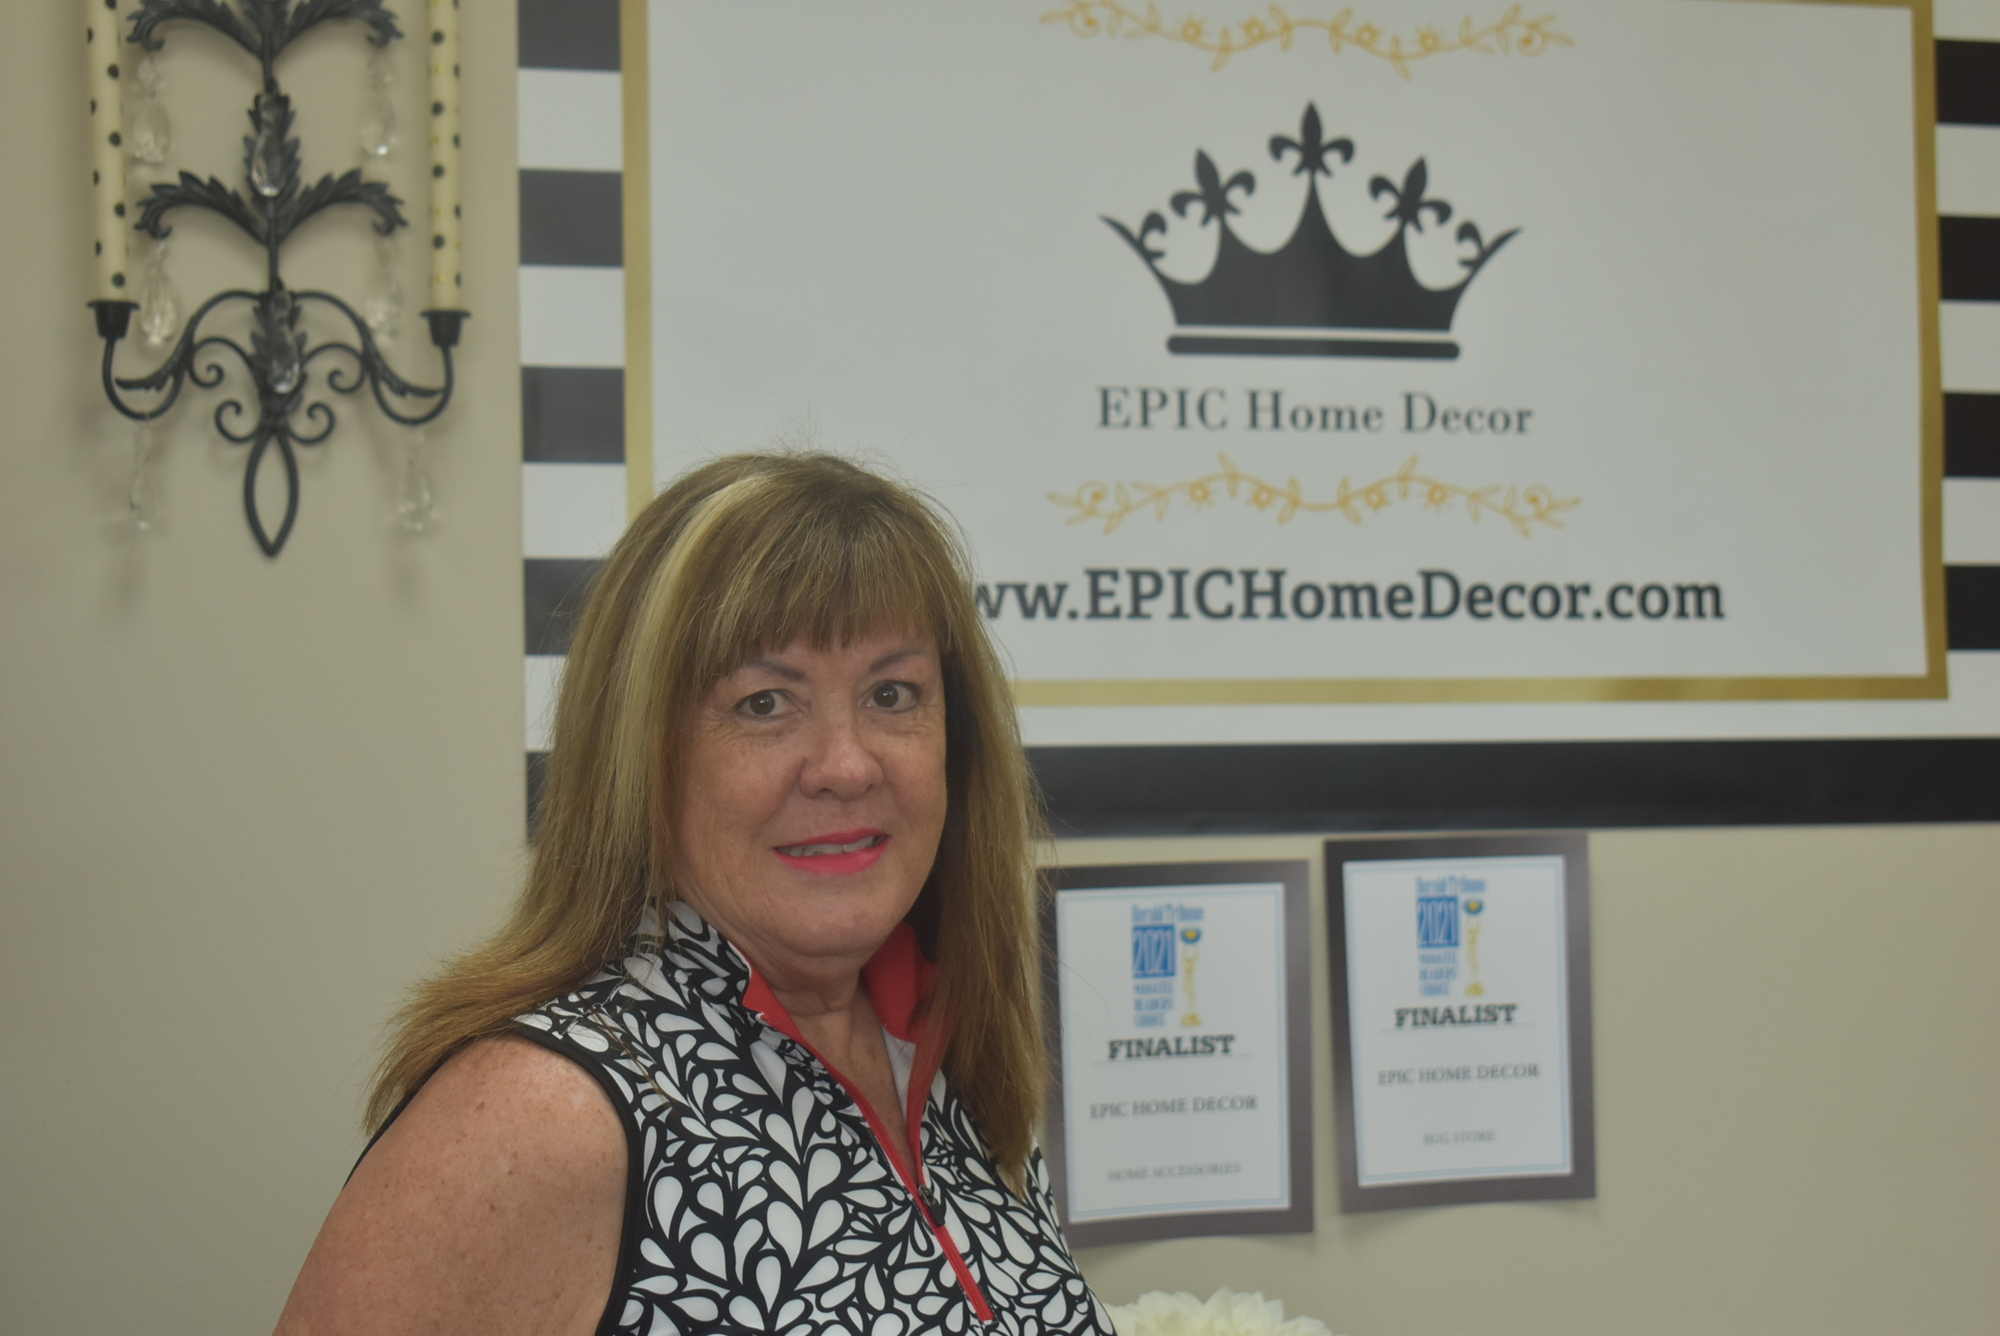 Epic Home Decor Owner Diane Creasy said she believes fewer people are returning north for the summer compared to previous years, leading to an increase in business during what is normally considered the offseason.